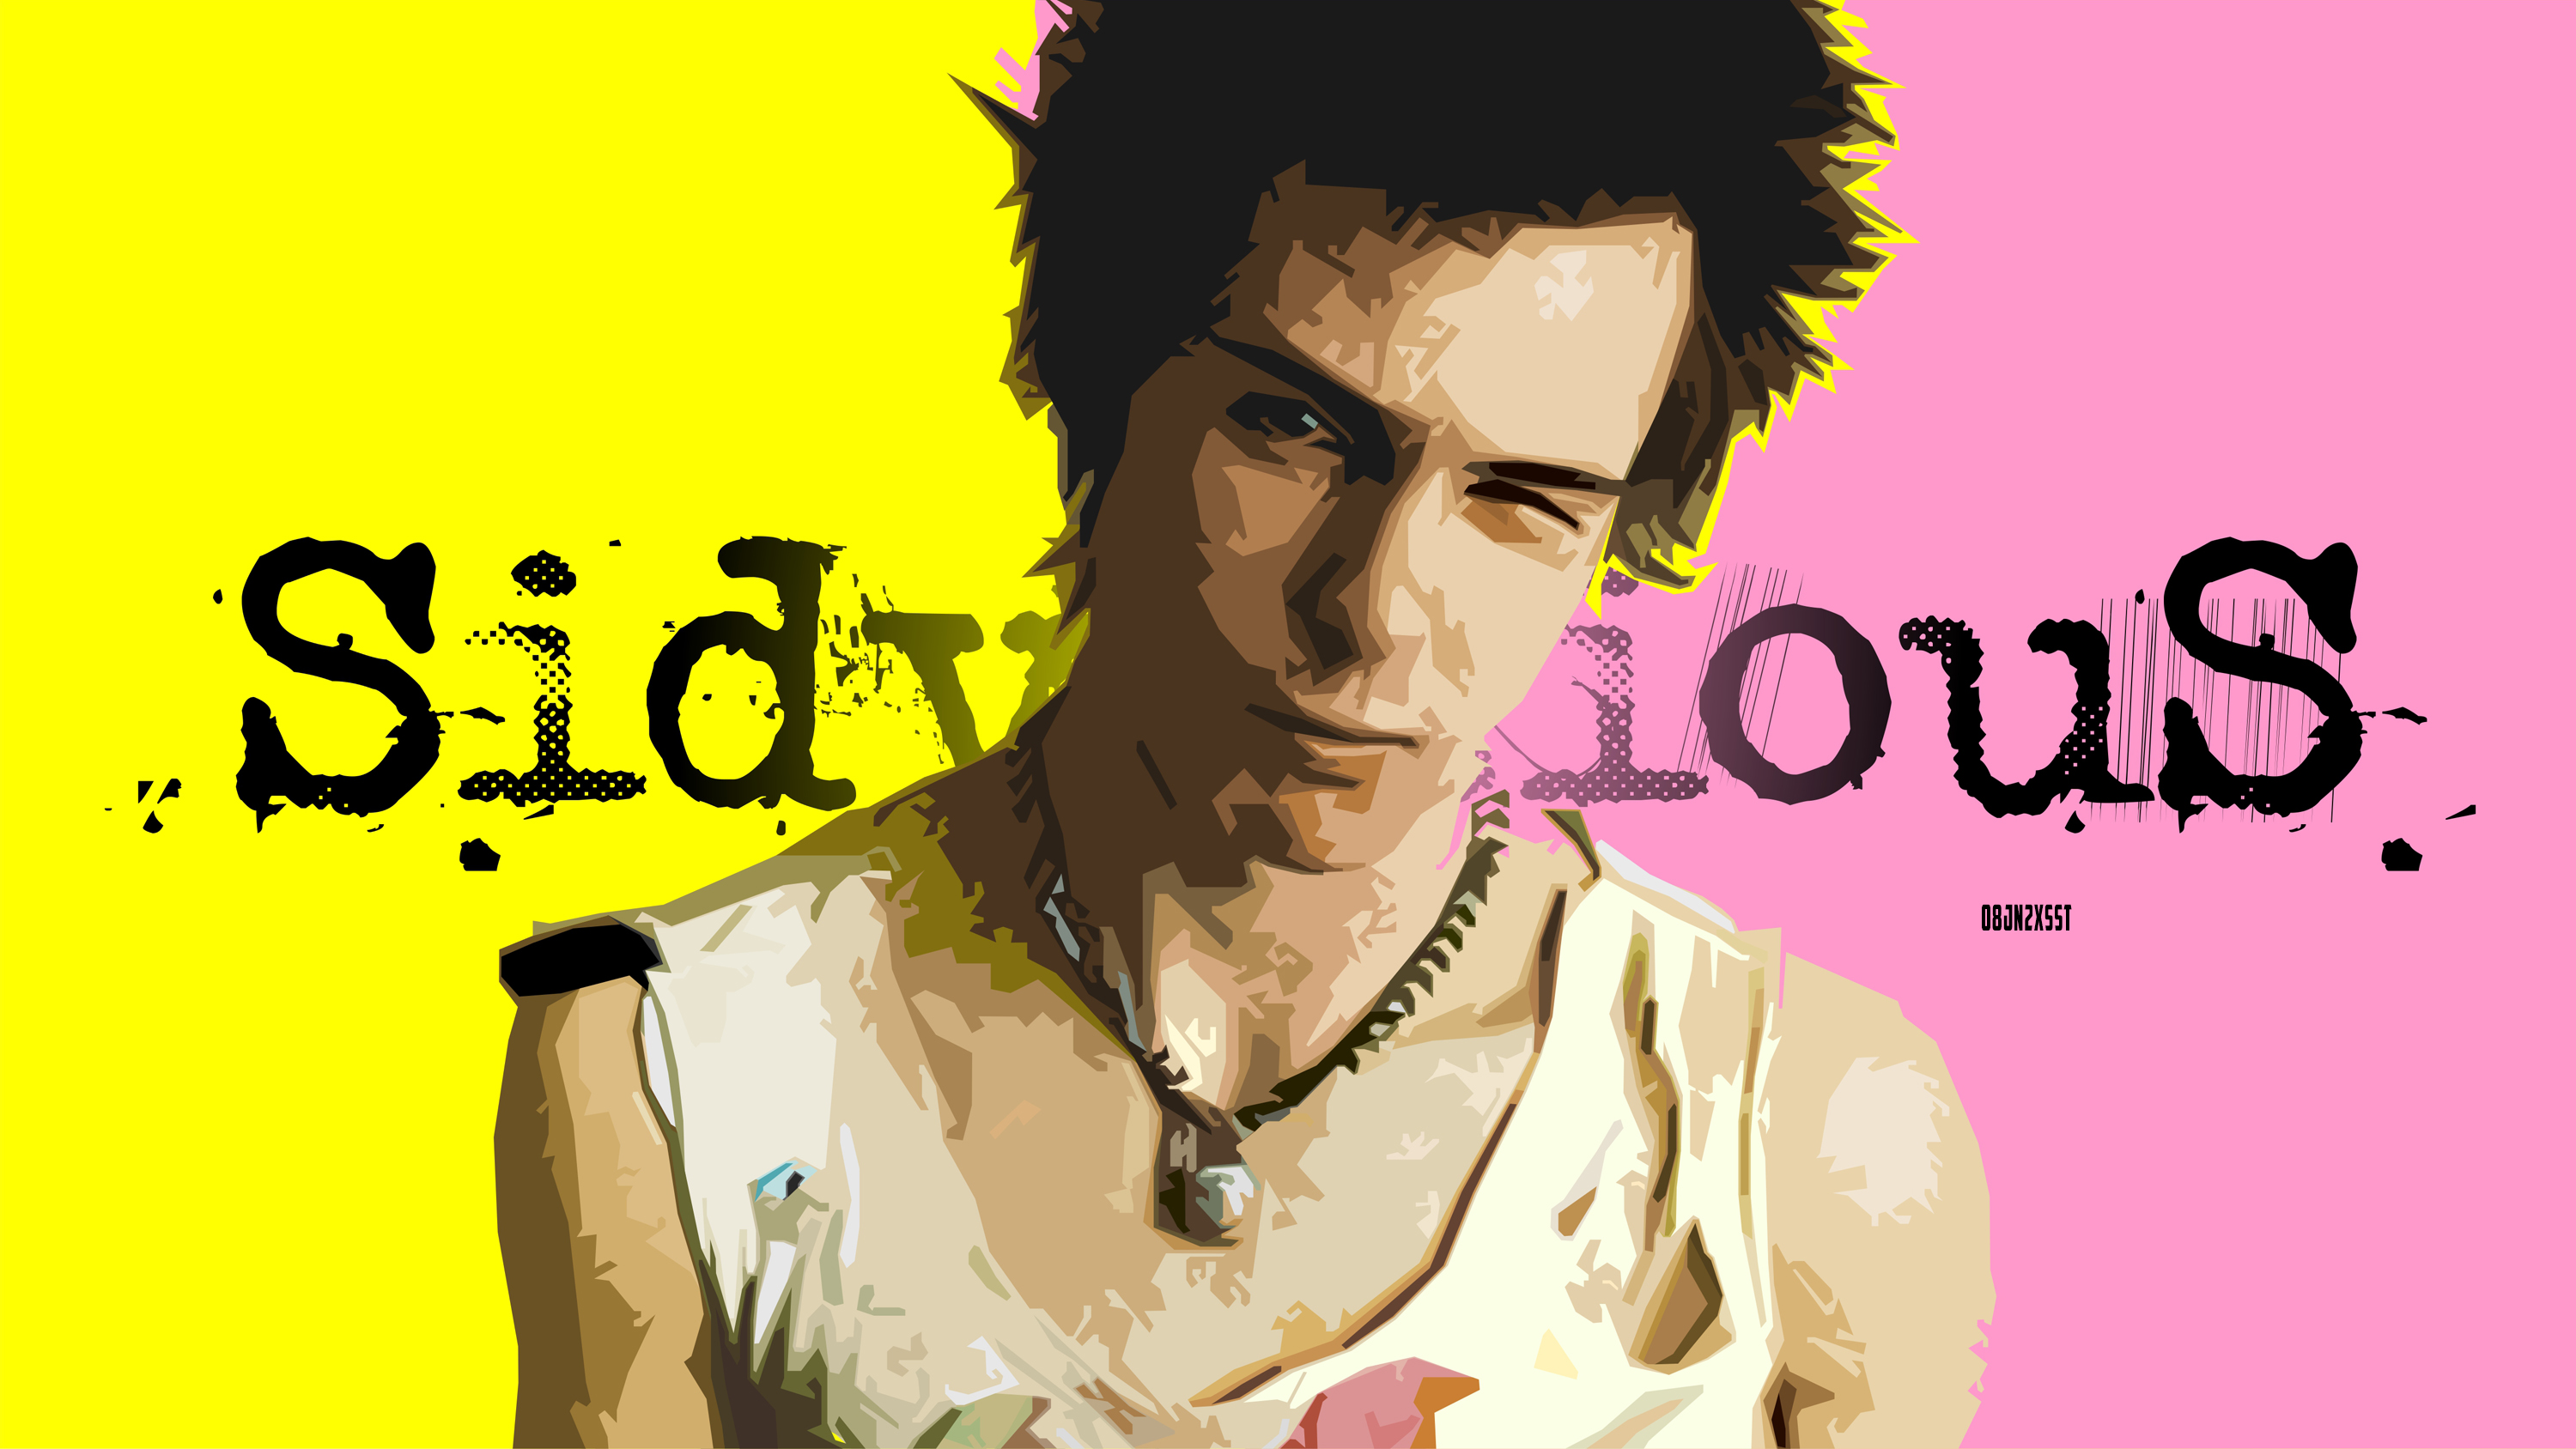 Sid Vicious by zelko